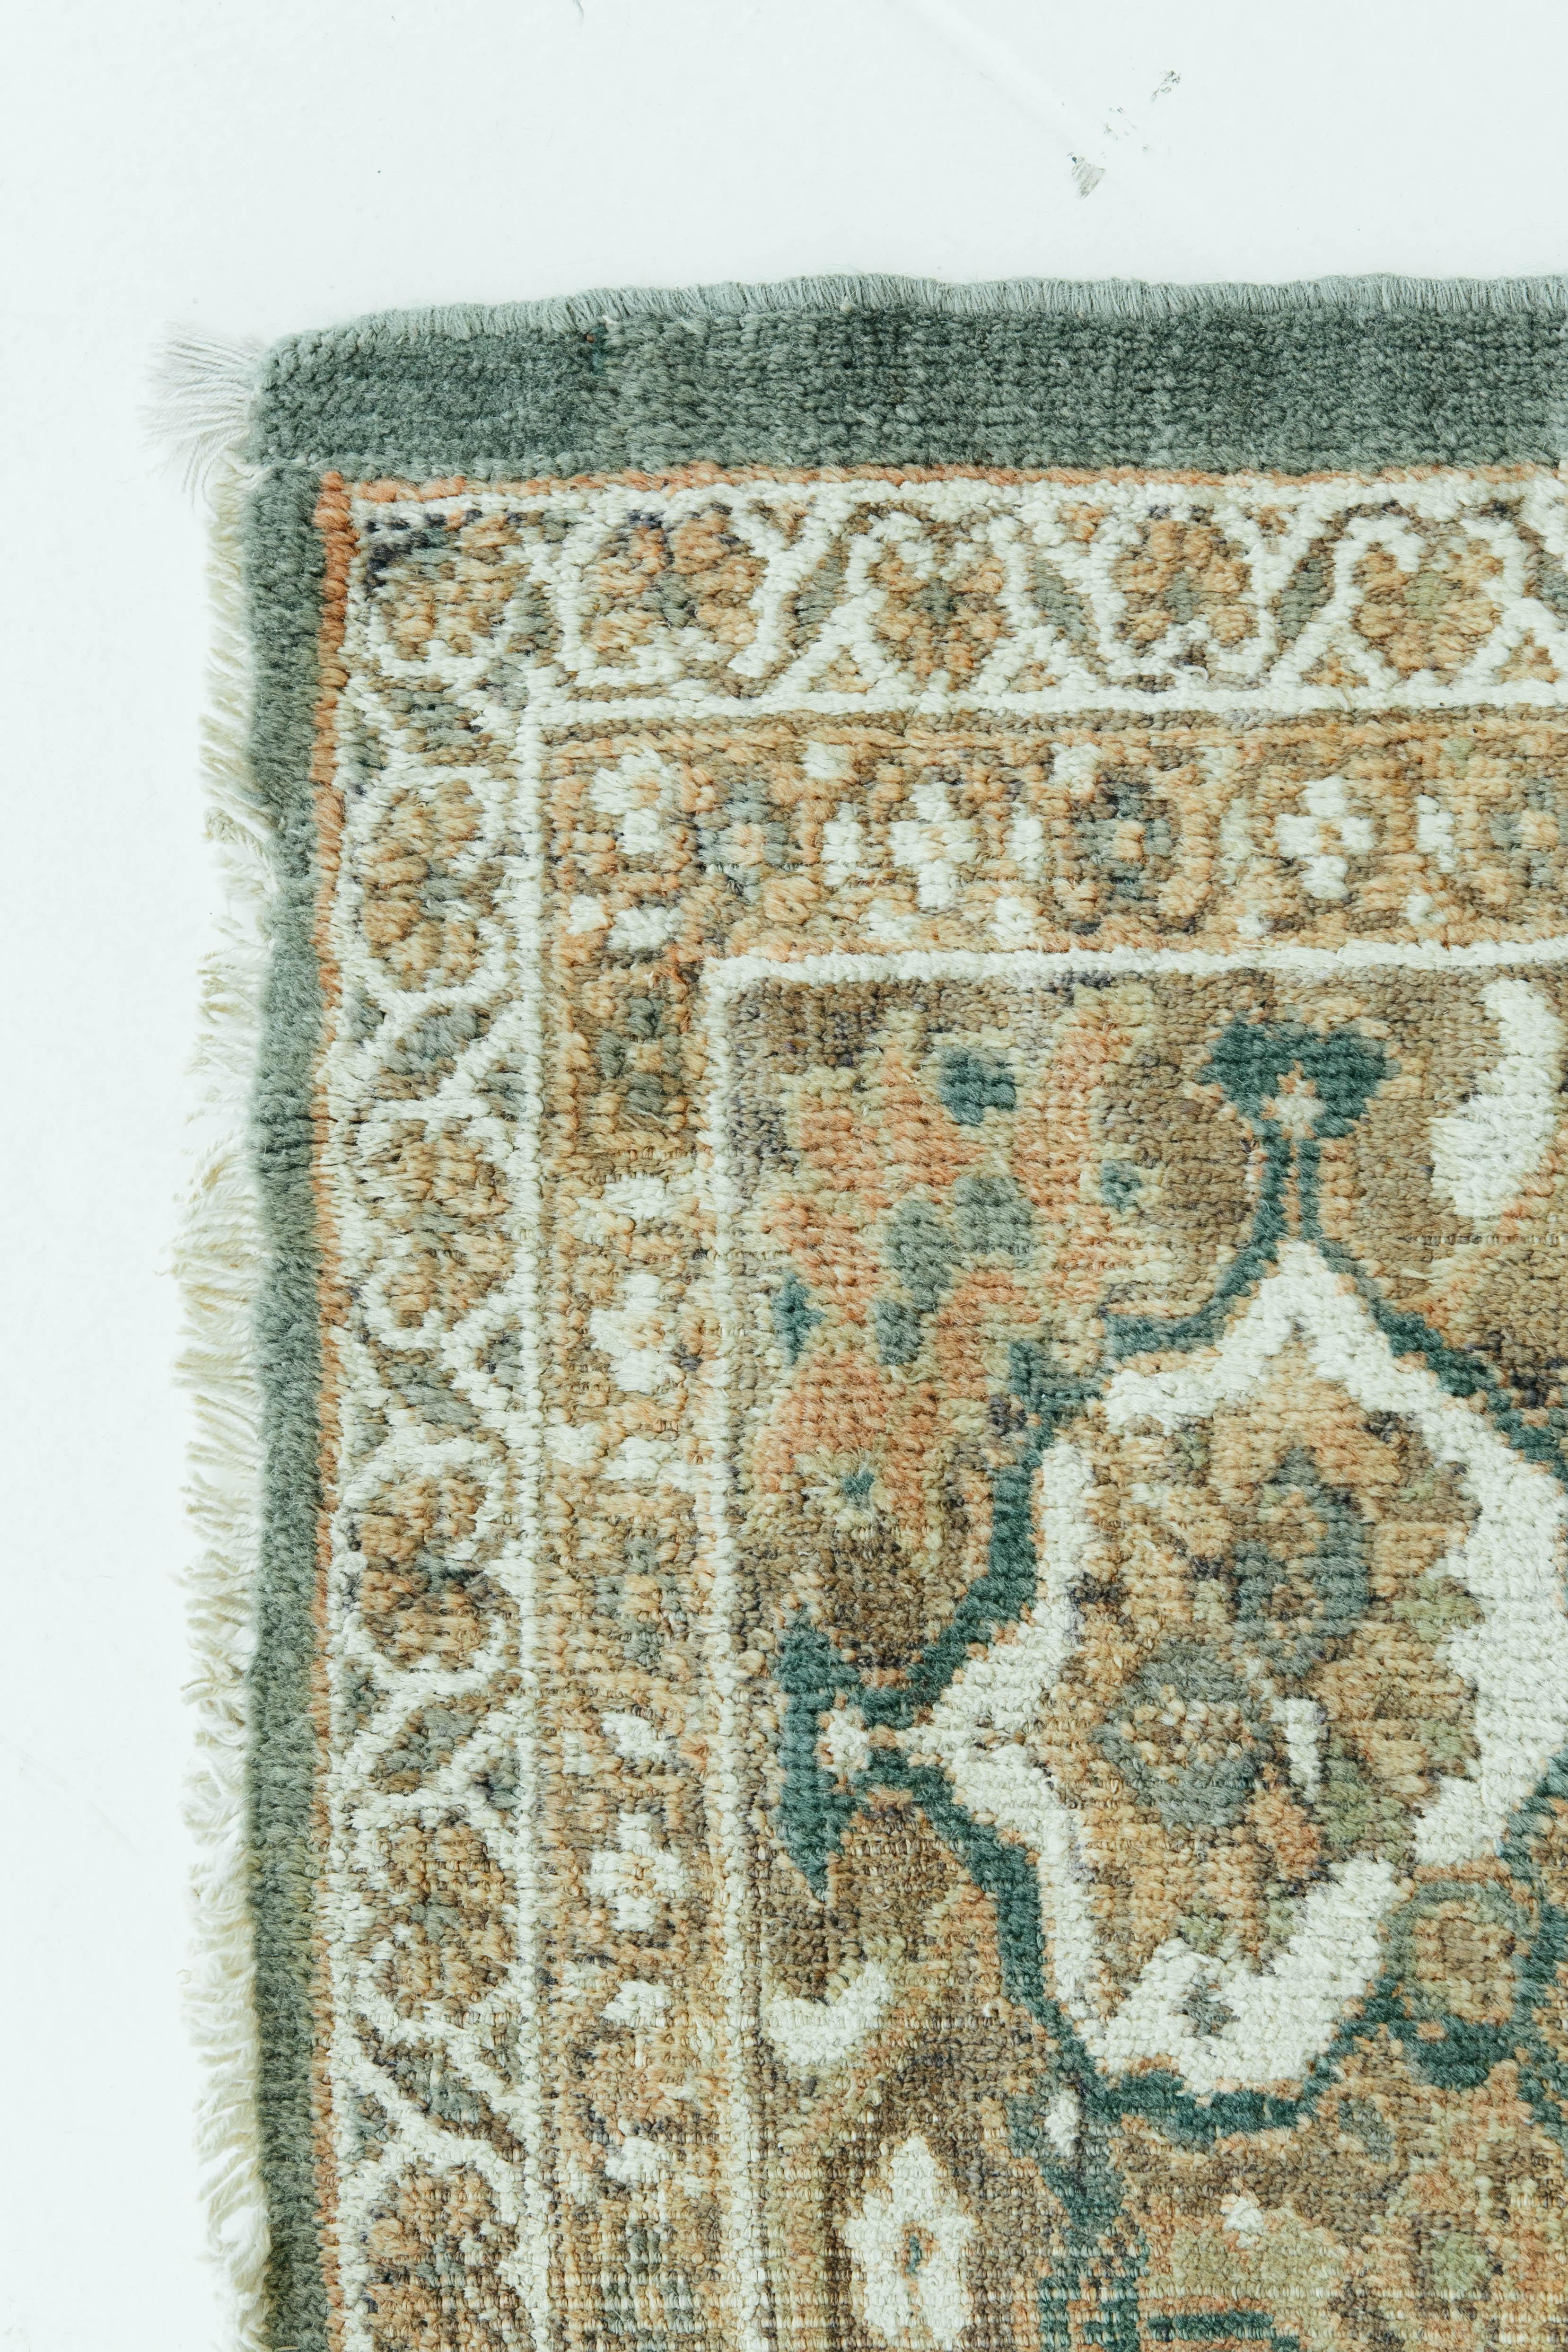 A antique Persian Sultanabad with beautiful floral motifs and a central medallion. Luxurious wool in a soft green and rust color create a cohesive and timely design. Sultanabad in northwest Iran (current day Arak), was a prominent center of village